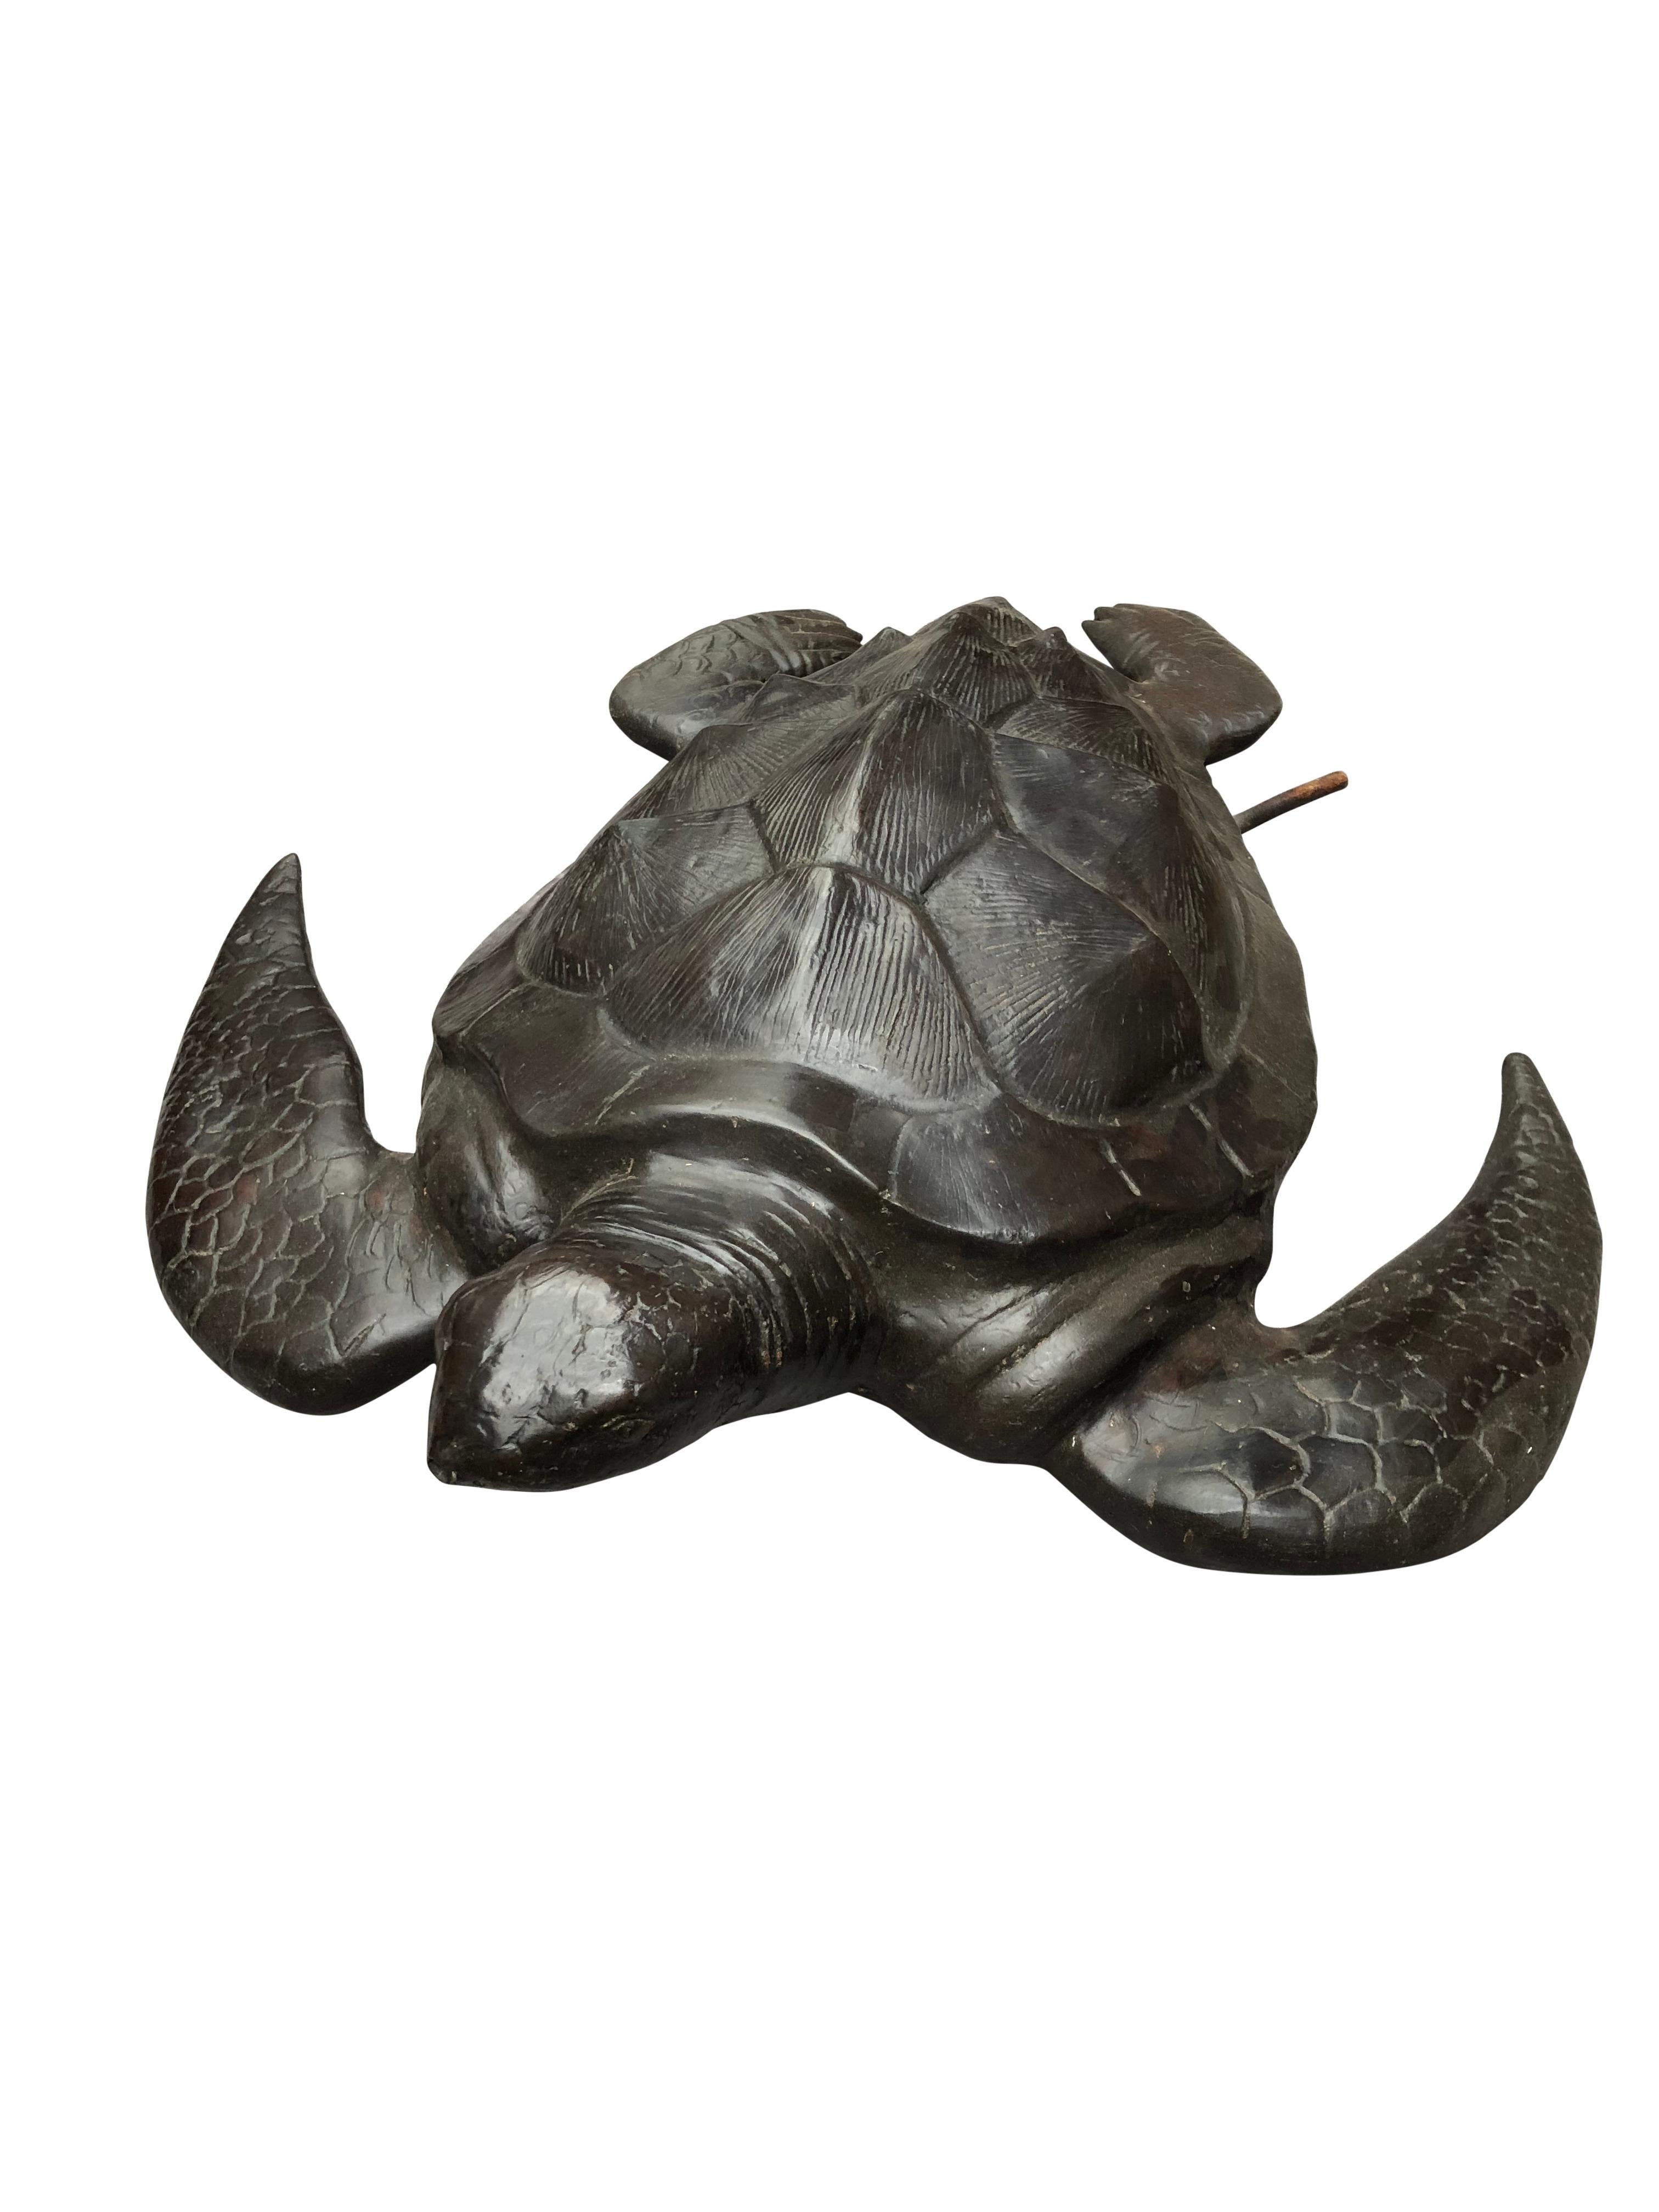 A gorgeous bronze casting of a sea turtle. Fantastic dark brown patina to this piece. Functions as a fountain with the water spouting from the mouth. Of course being bronze this piece can live outside with no fear of rusting. Offered in excellent